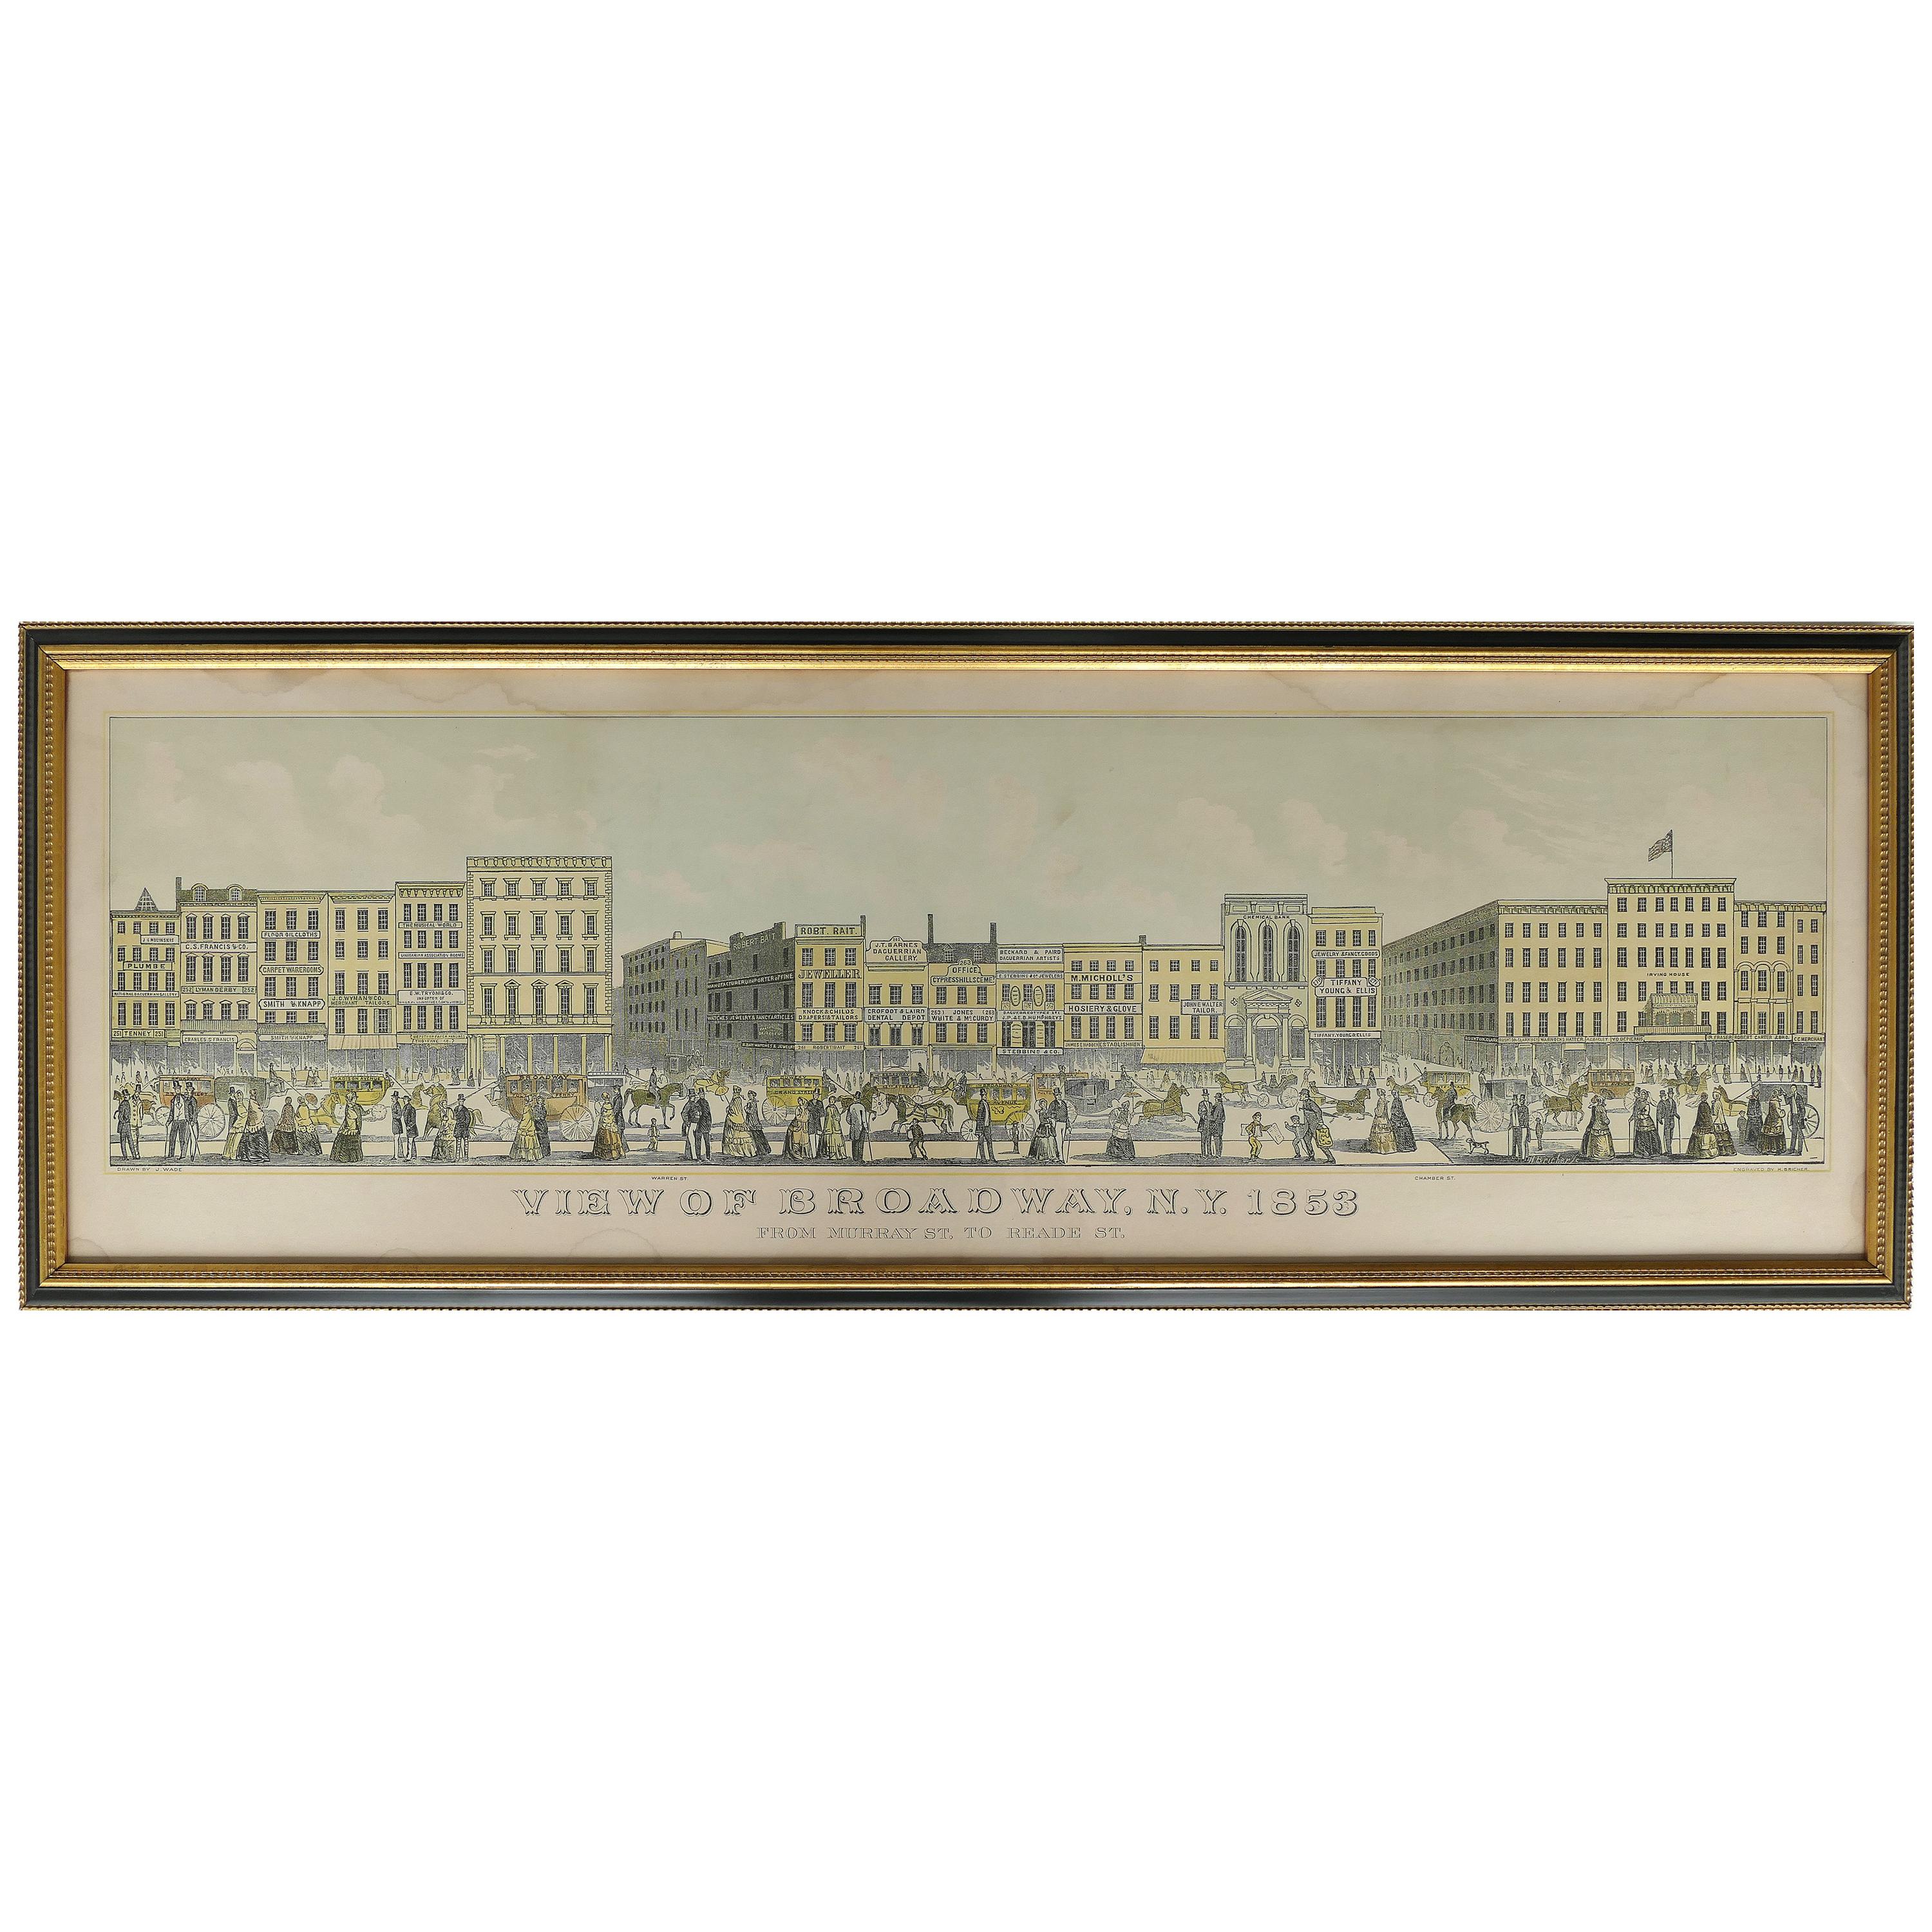 "View of Broadway, N.Y. 1853" Engraving by J. Wade and H. Bricher For Sale